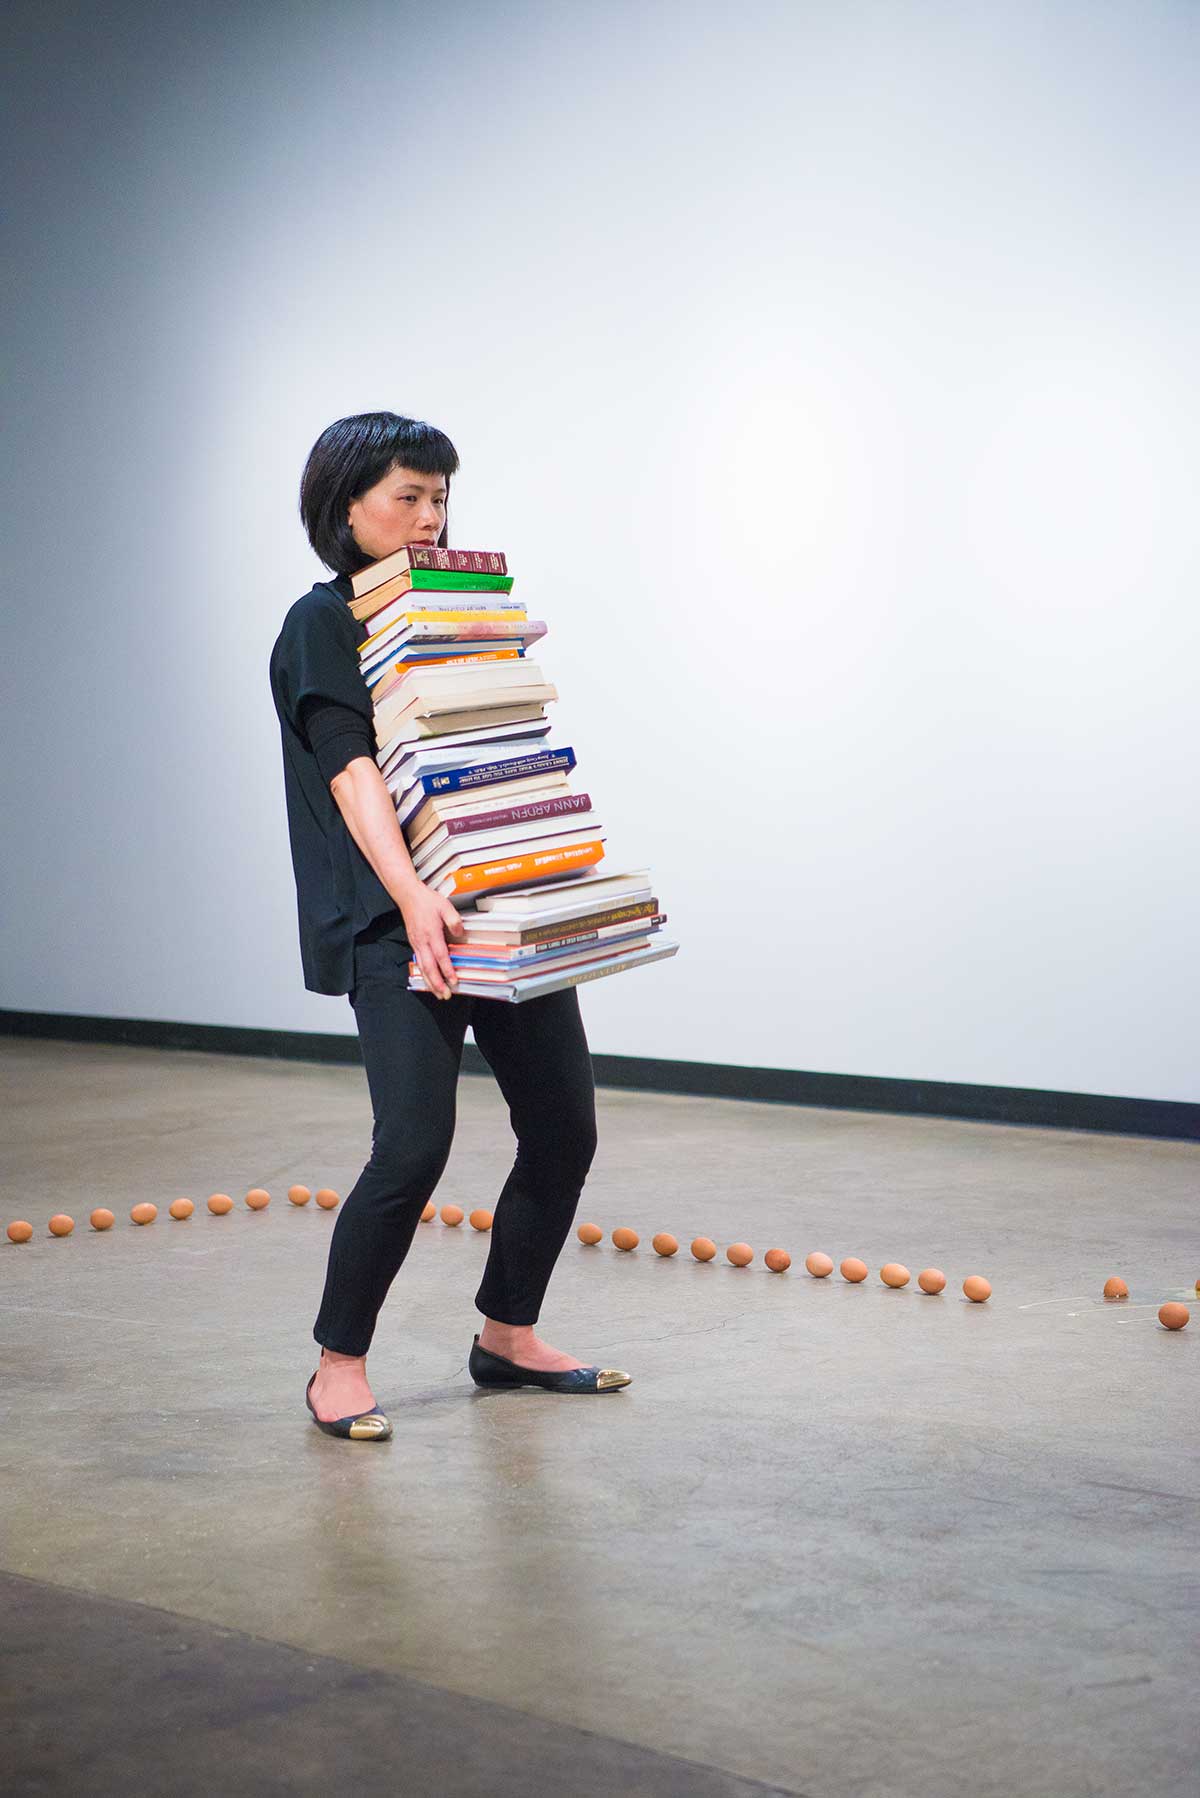 Chun Hua Catherine Dong holds a stack of books and keeps holding position as long as she can